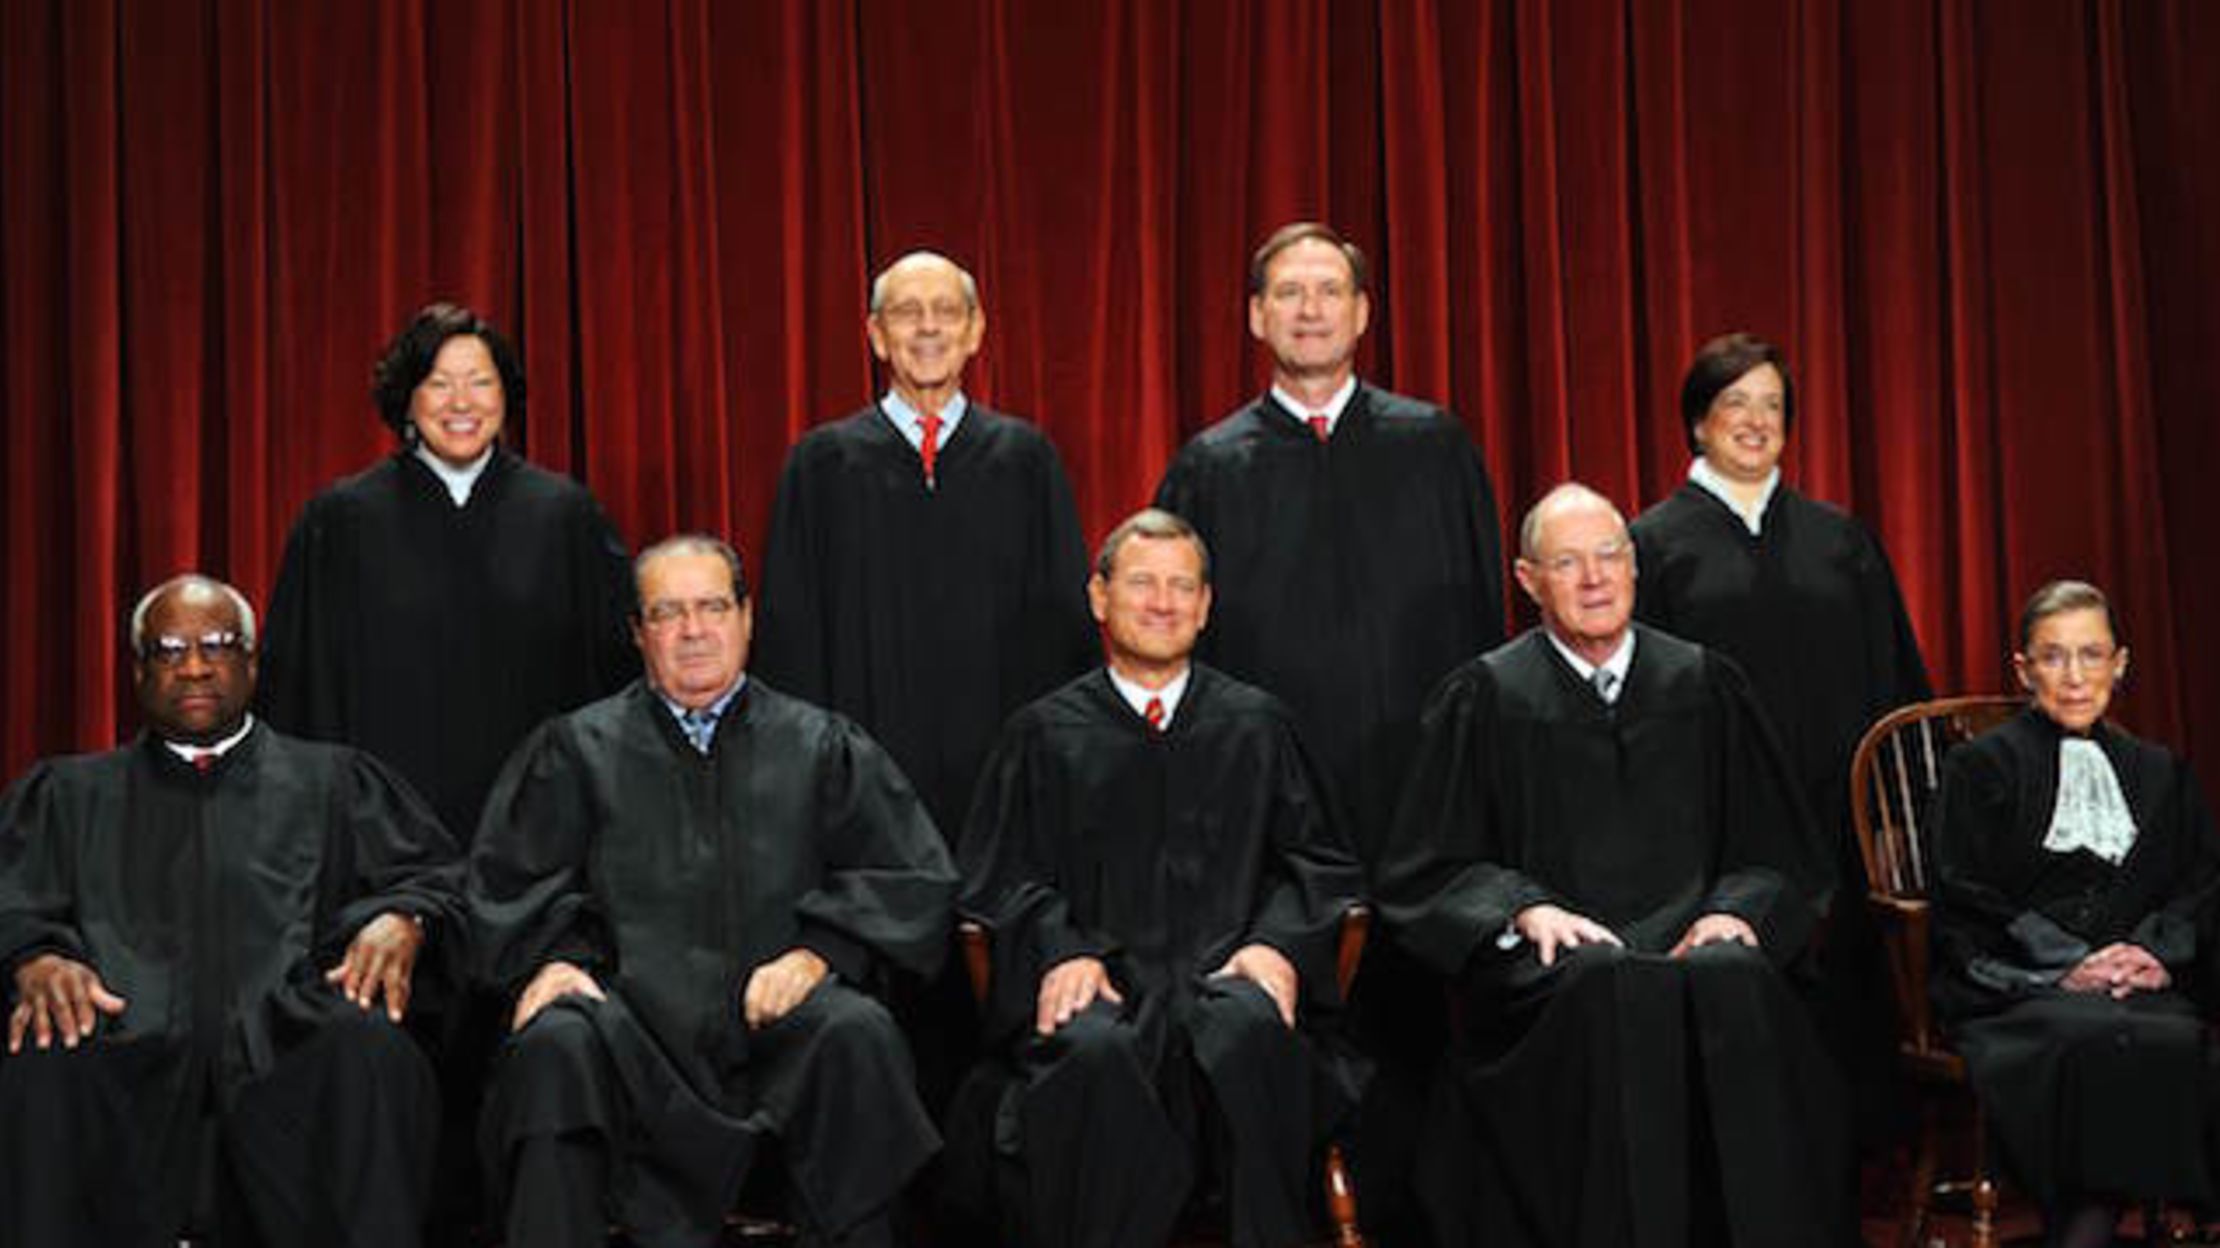 What is the job of a supreme court justice